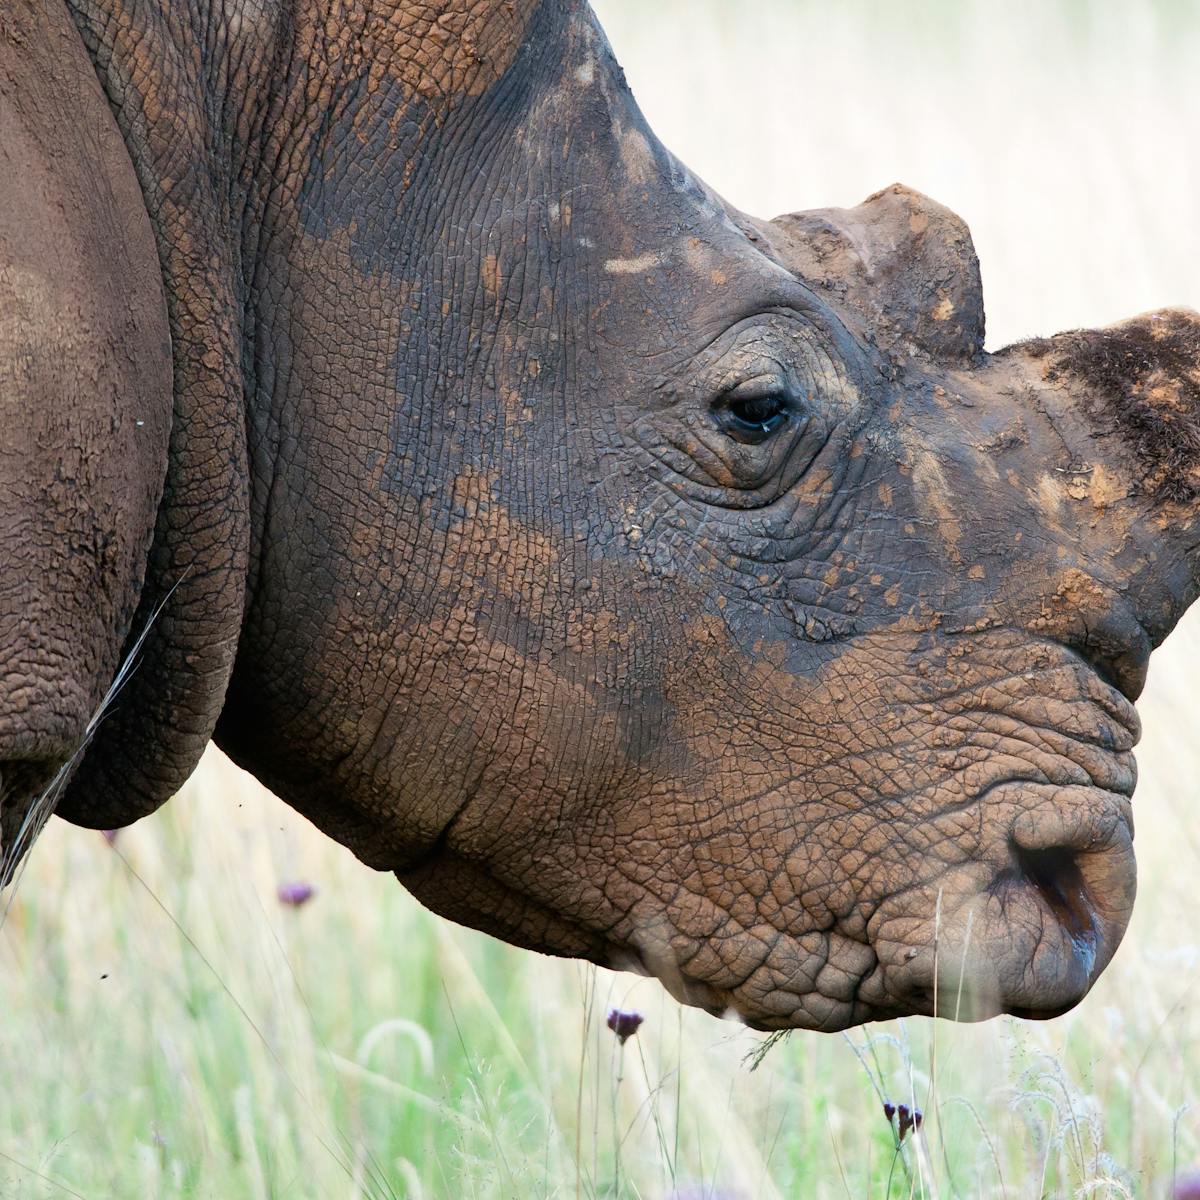 Rhino horn must become a socially unacceptable product in Asia